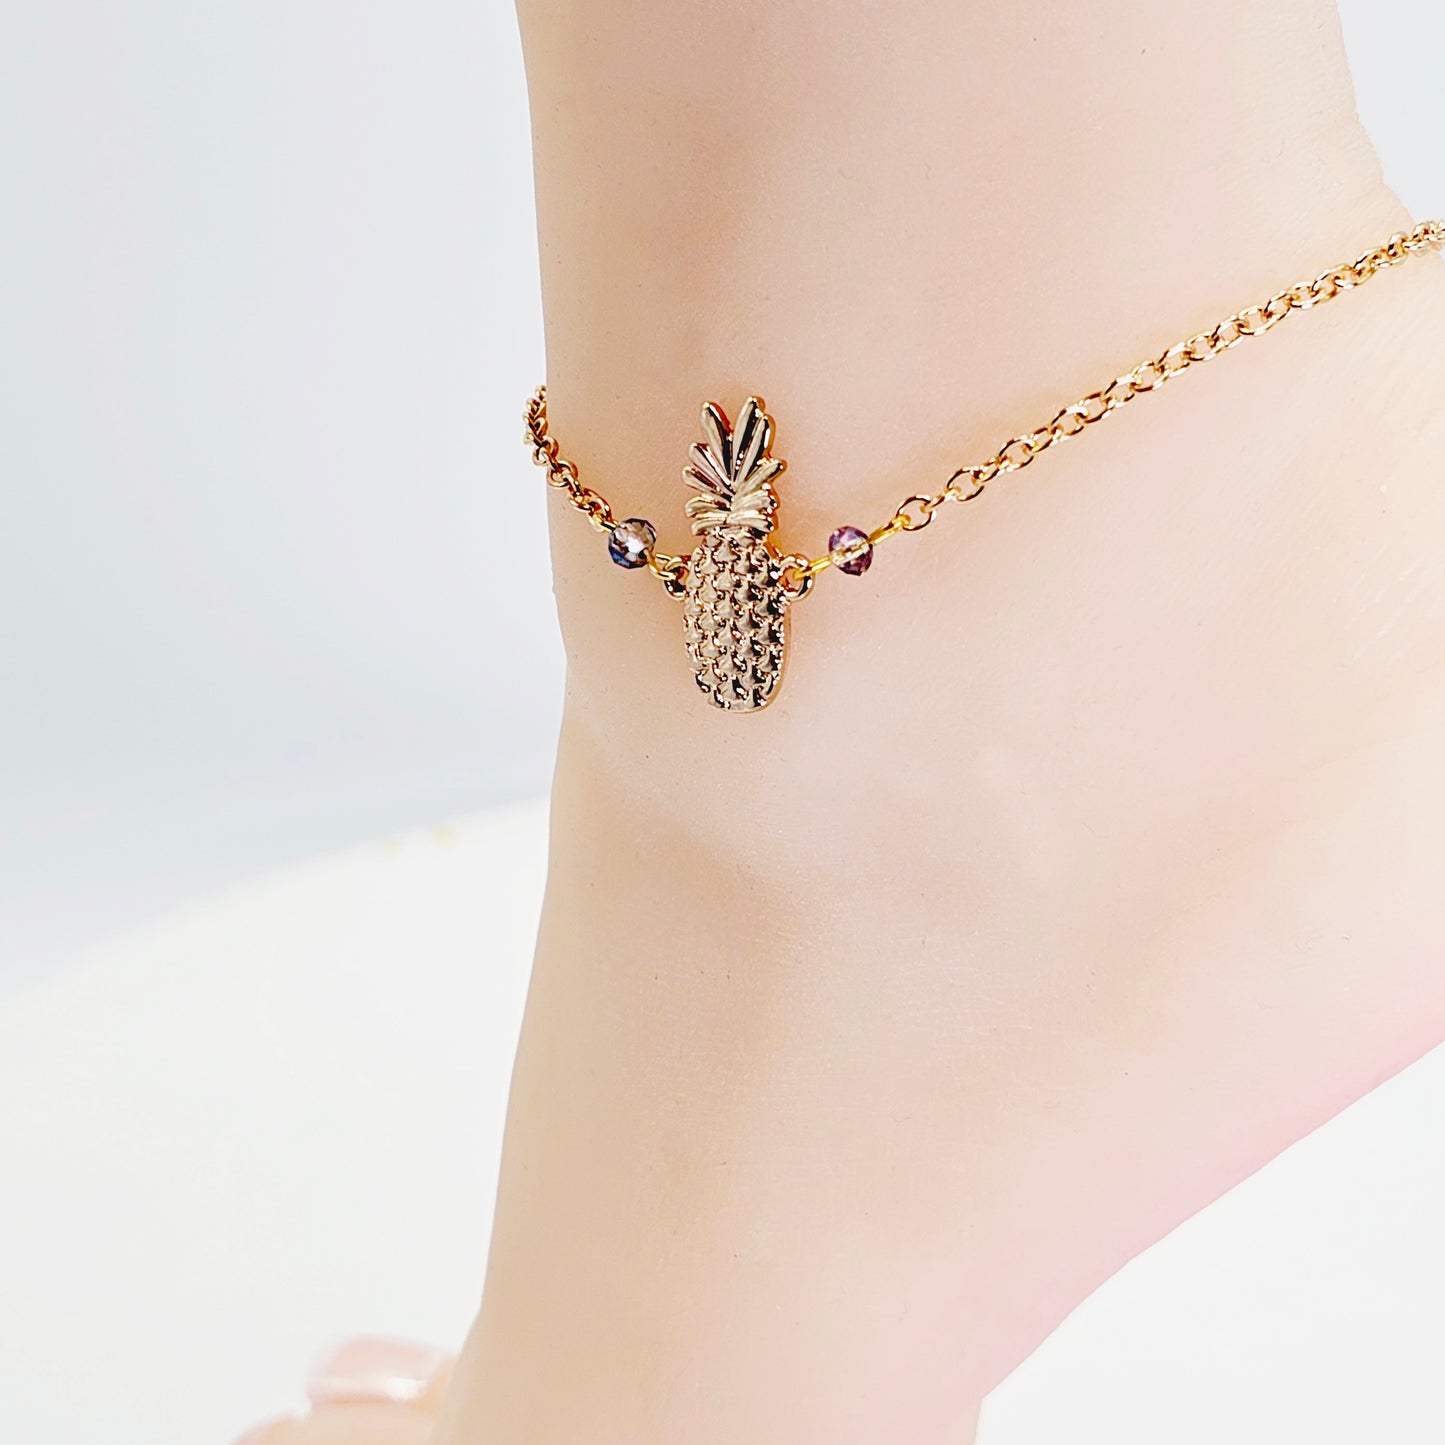 Gold Pineapple Anklet With Glass Bead Accents. Ankle Bracelet. Alternative Lifestyle Jewelry